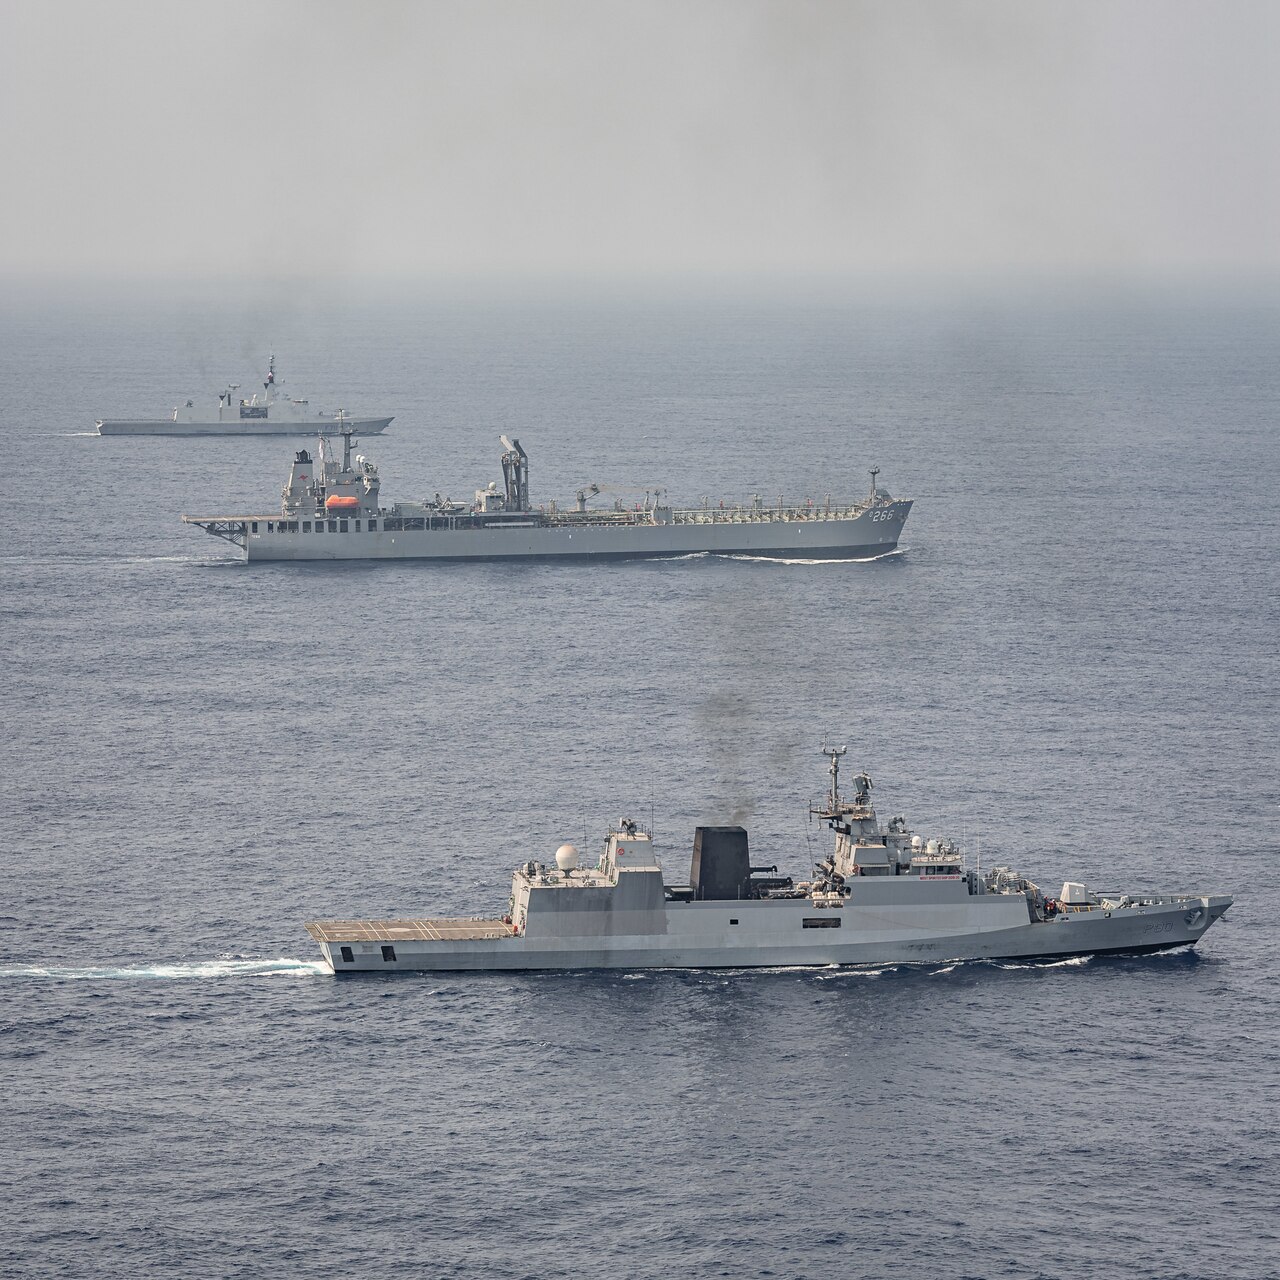 BAY OF BENGAL (April 5, 2021) Ships operate in the Bay of Bengal in support of exercise La Perouse 2021, April 5. La Perouse consists of naval assets from Australia, France, India, Japan and the United States. La Perouse is an exercise conducted during the annual French Navy midshipman deployment called Mission Jeanne d'Arc. The exercise is designed to conduct training, enhance cooperation in  maritime surveillance, maritime interdiction operations, and air operations. As the U.S. Navy's largest forward-deployed fleet, 7th Fleet employs 50-70 ships and submarines across the Western Pacific and Indian oceans. U.S. 7th Fleet routinely operates and interacts with 35 maritime nations while conducting missions to preserve and
protect a free and open Indo-Pacific Region. (Photo courtesy asset by French Navy/Released)